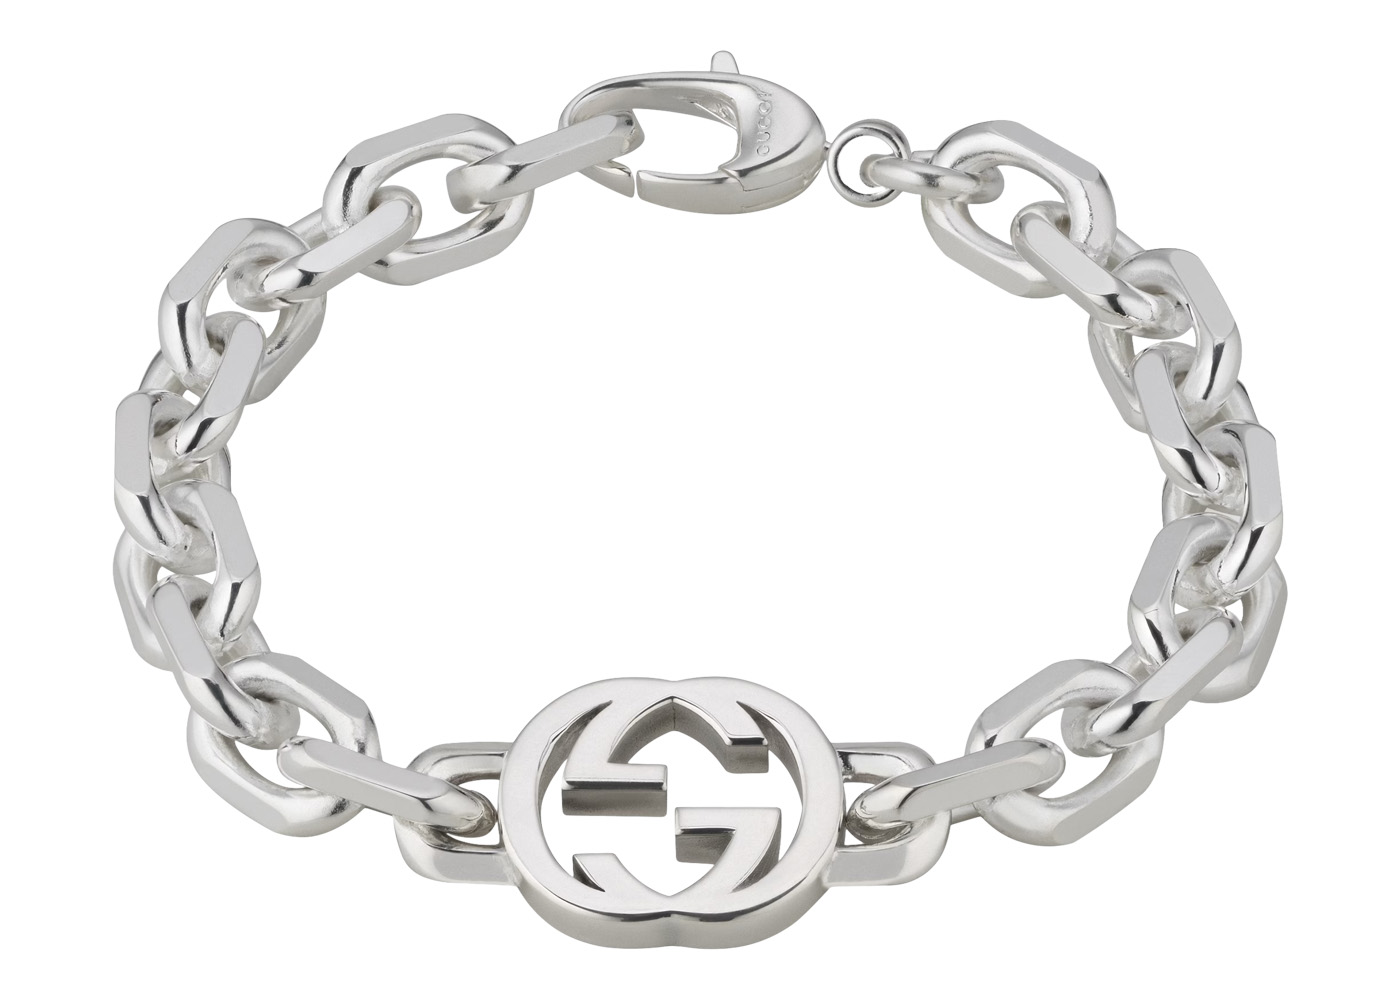 Gucci Link Bracelet 001-449-00104 - Joint Venture Jewelry | Joint Venture  Jewelry | Cary, NC